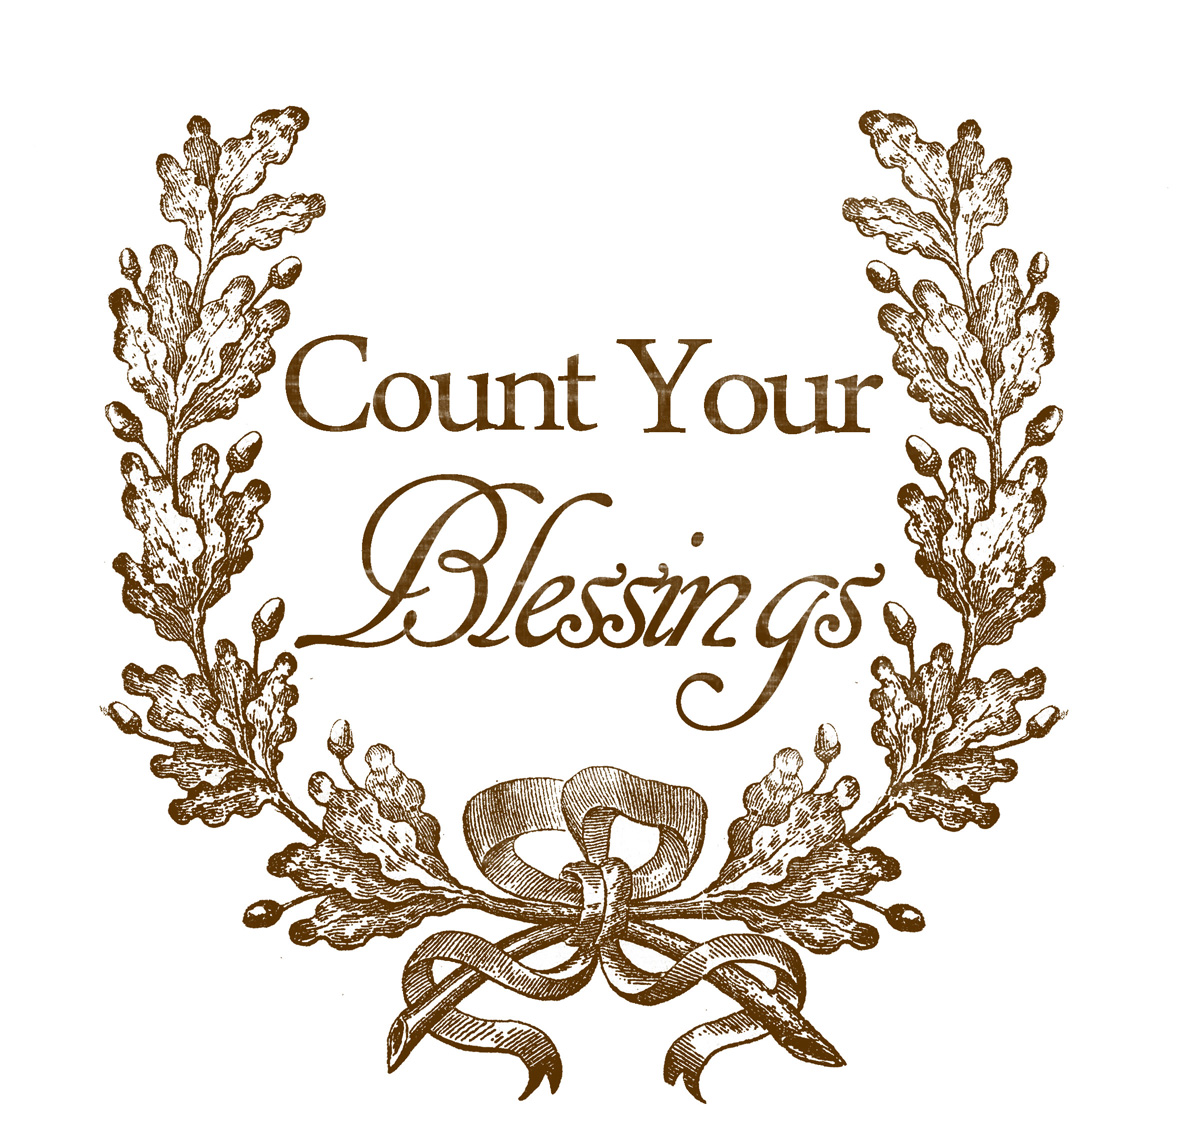 Count Your Blessings Card